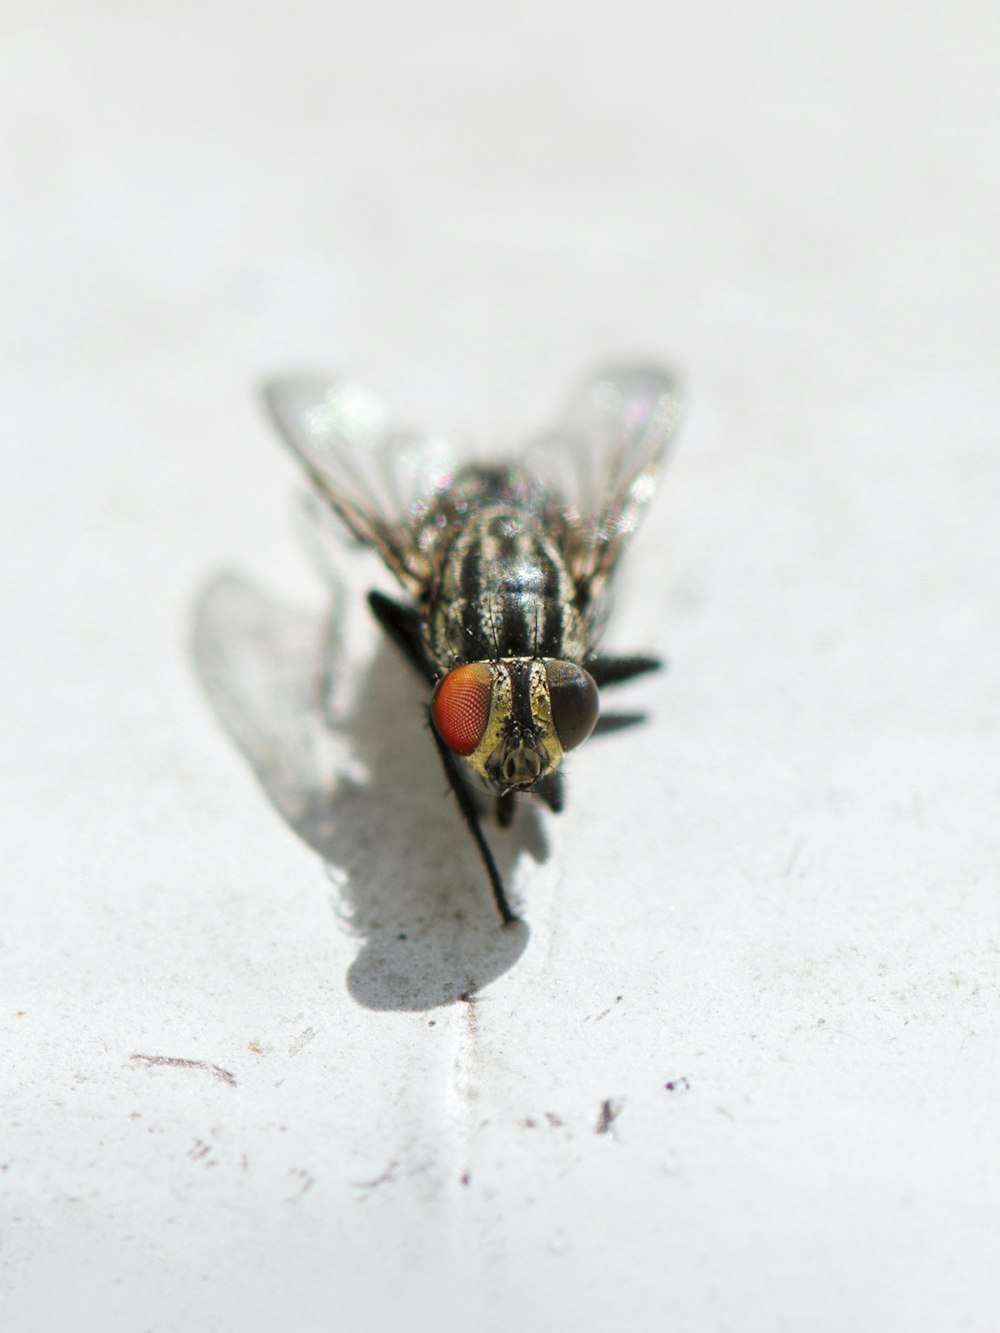 black and gray fly on white surface